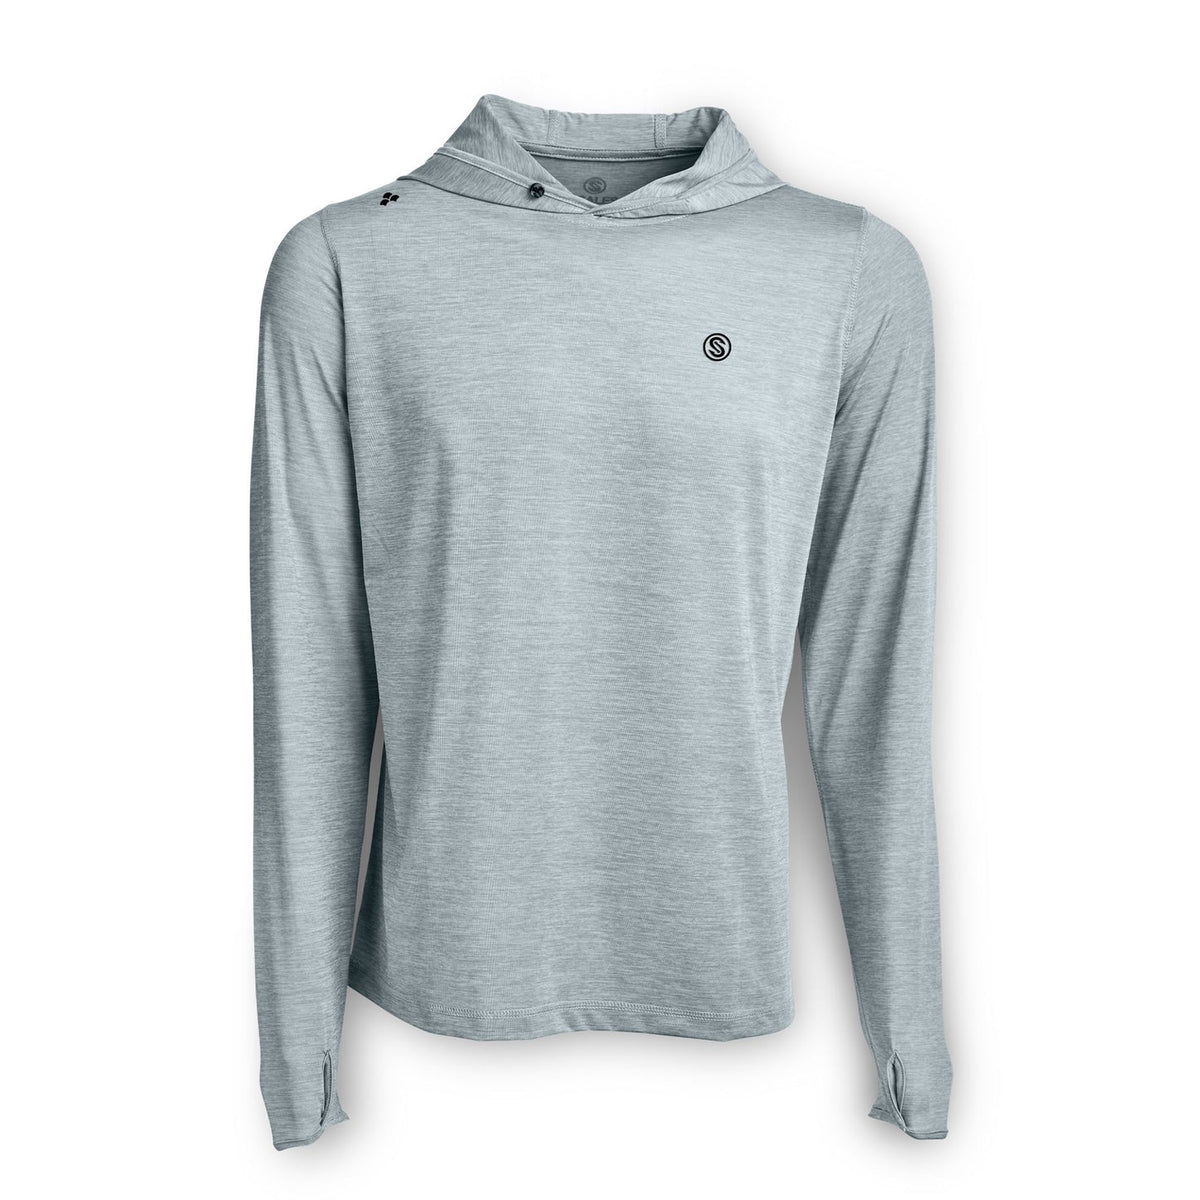 SCALES Iconic Hooded Long Sleeve Active Performance